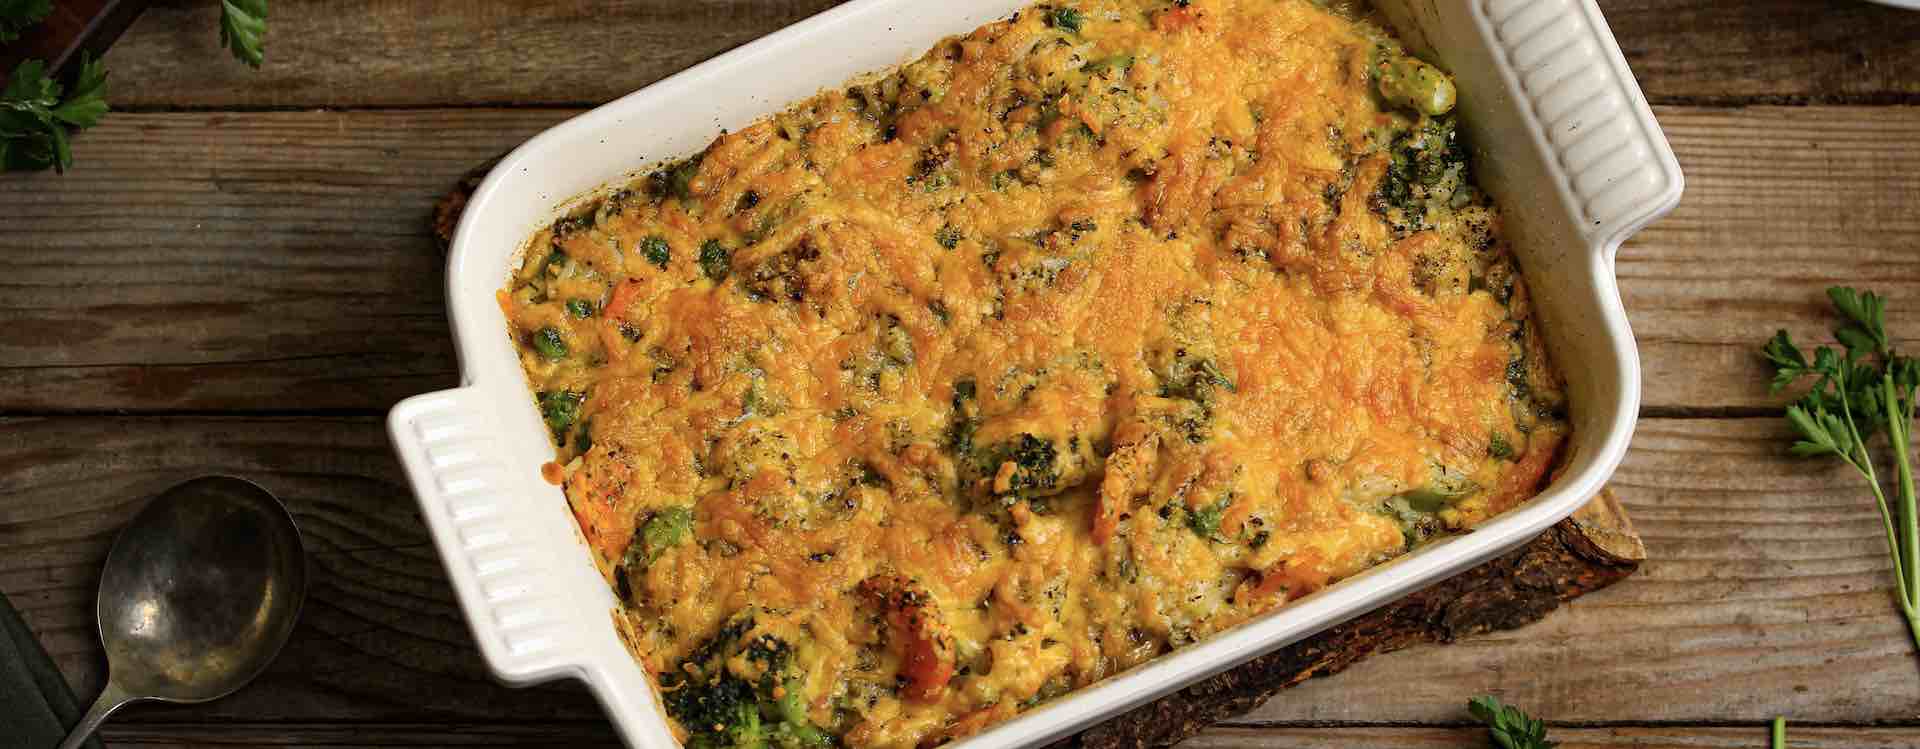 Country Mix & Rice Casserole